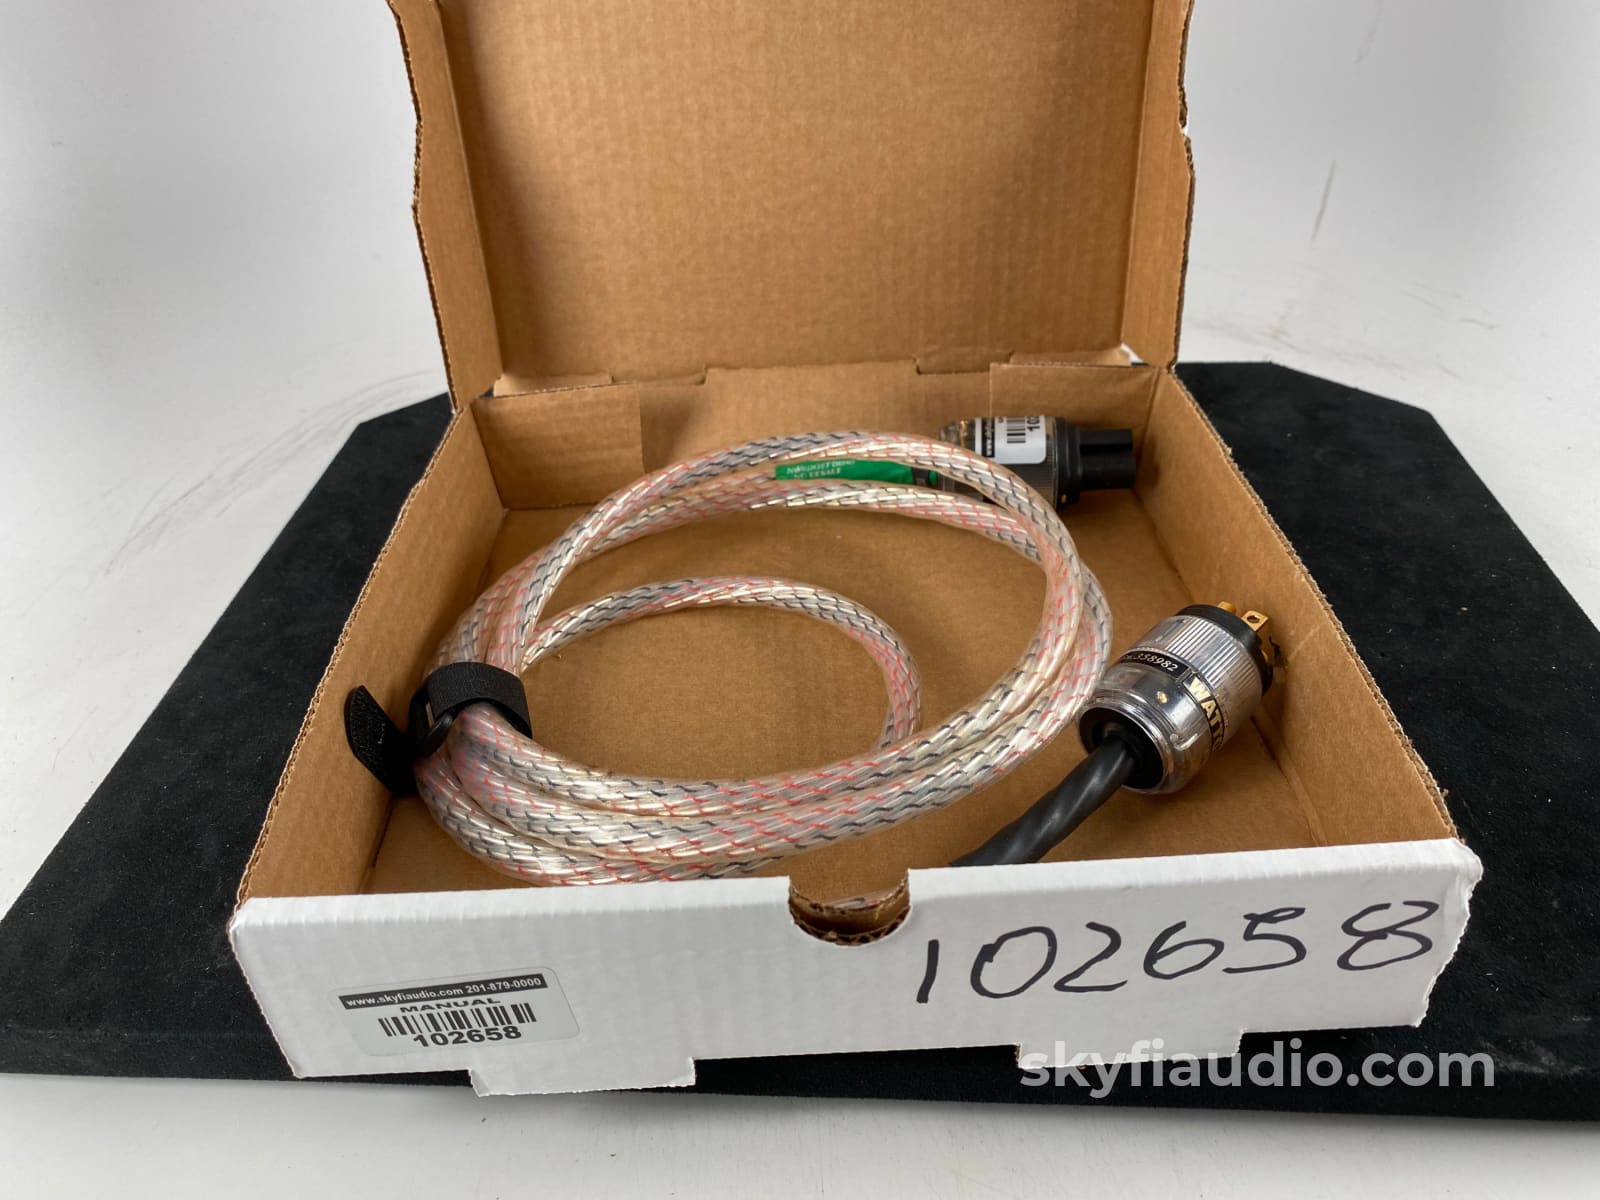 Nordost Valhalla 1 Power Cord - 2M Cables